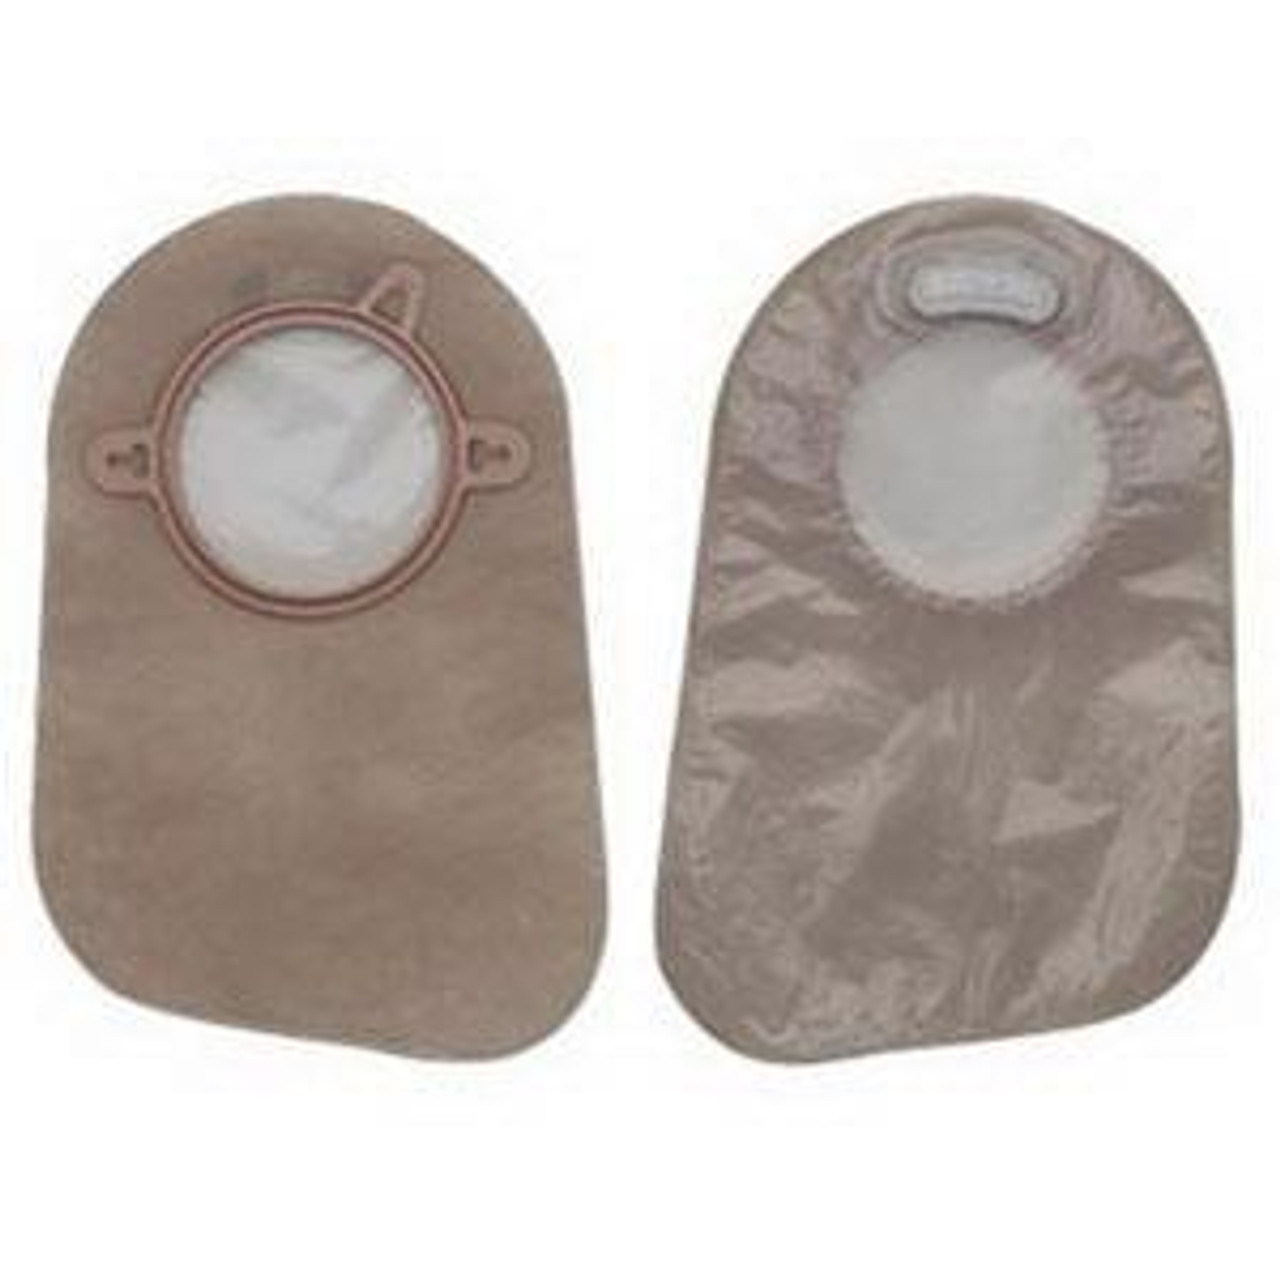 NEW IMAGE CLOSED Pouch, FILTER, 1 3/4" FLANGE, Transparent, 9 BX/60 (HOL-18362) (Hollister 18362)